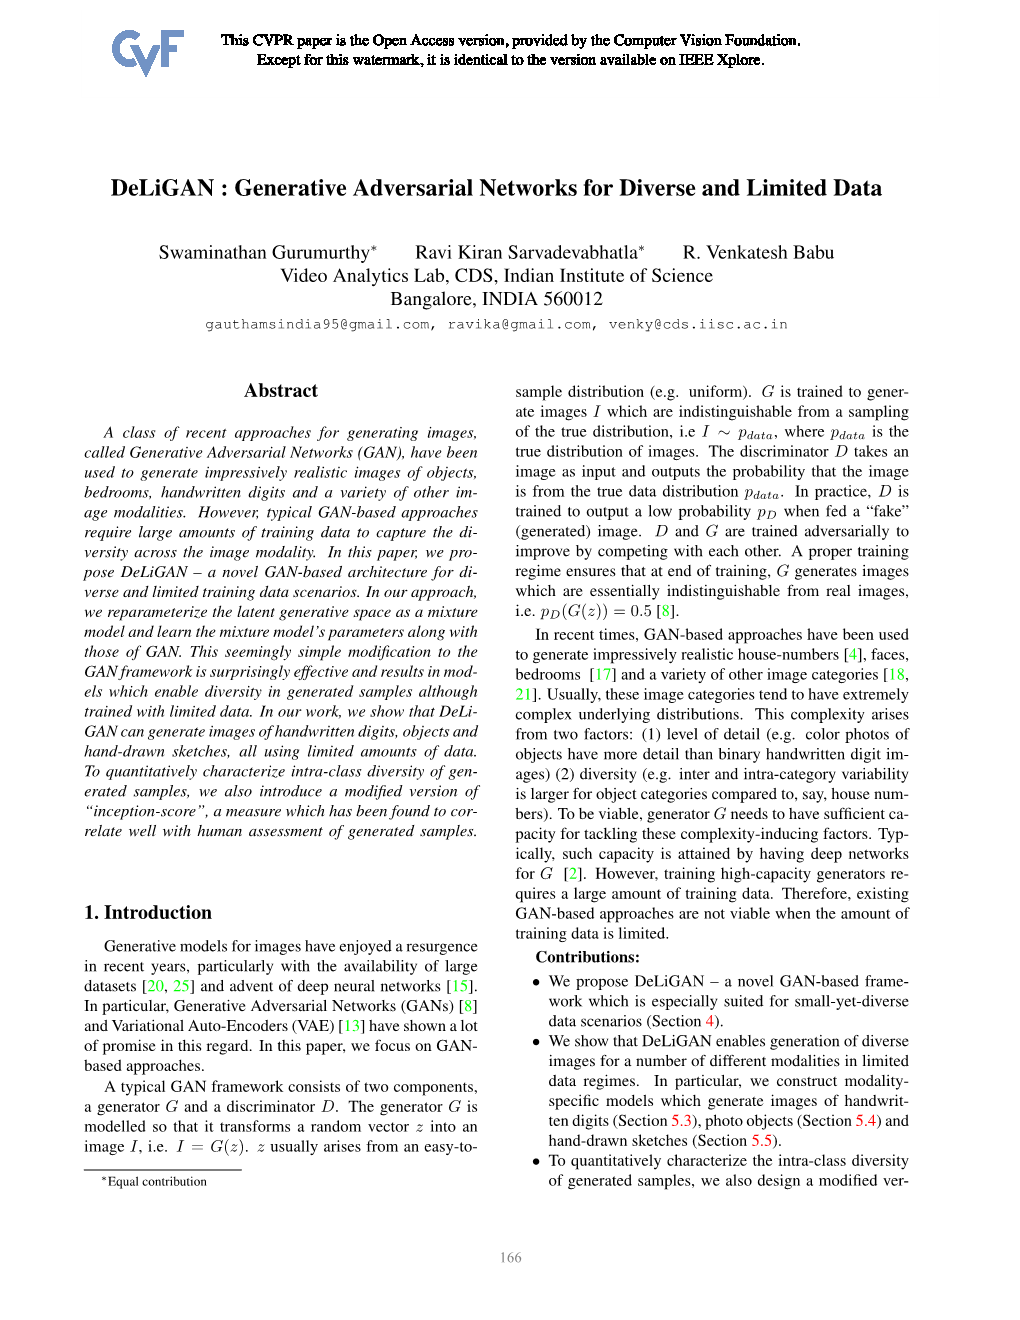 Generative Adversarial Networks for Diverse and Limited Data